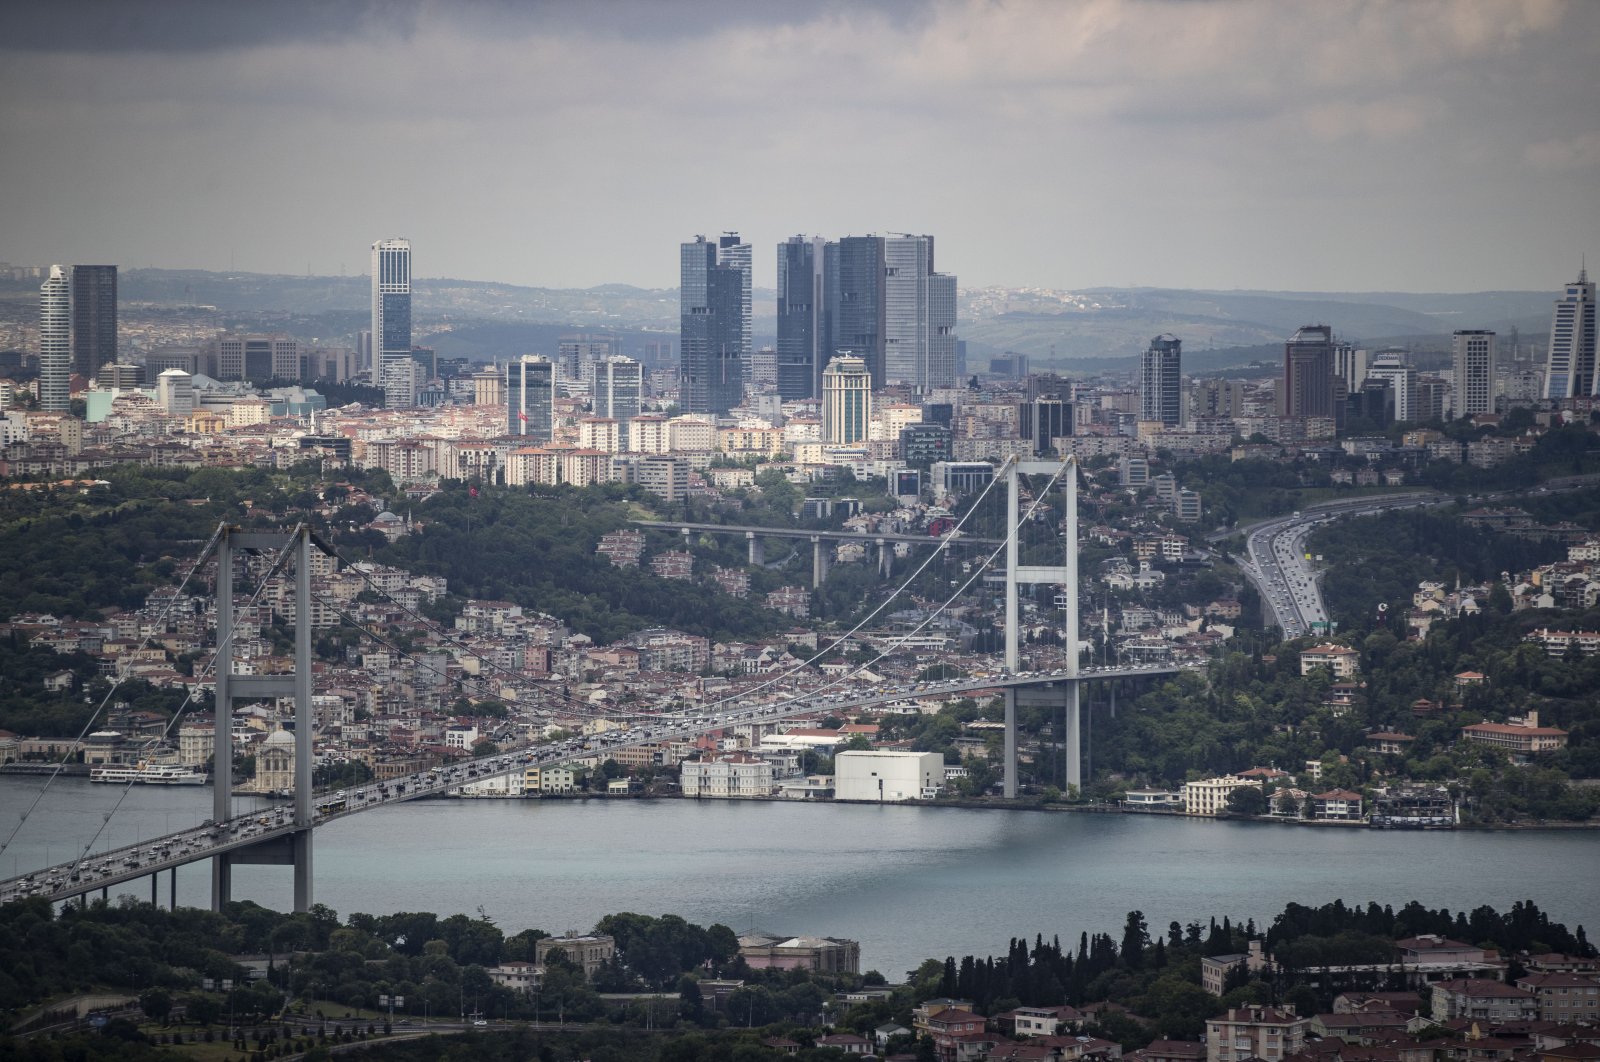 A general view of the July 15 Martyrs Bridge, formerly known as the Bosporus Bridge, and surrounding buildings, Istanbul, Turkey, May 28, 2020. (AA Photo)